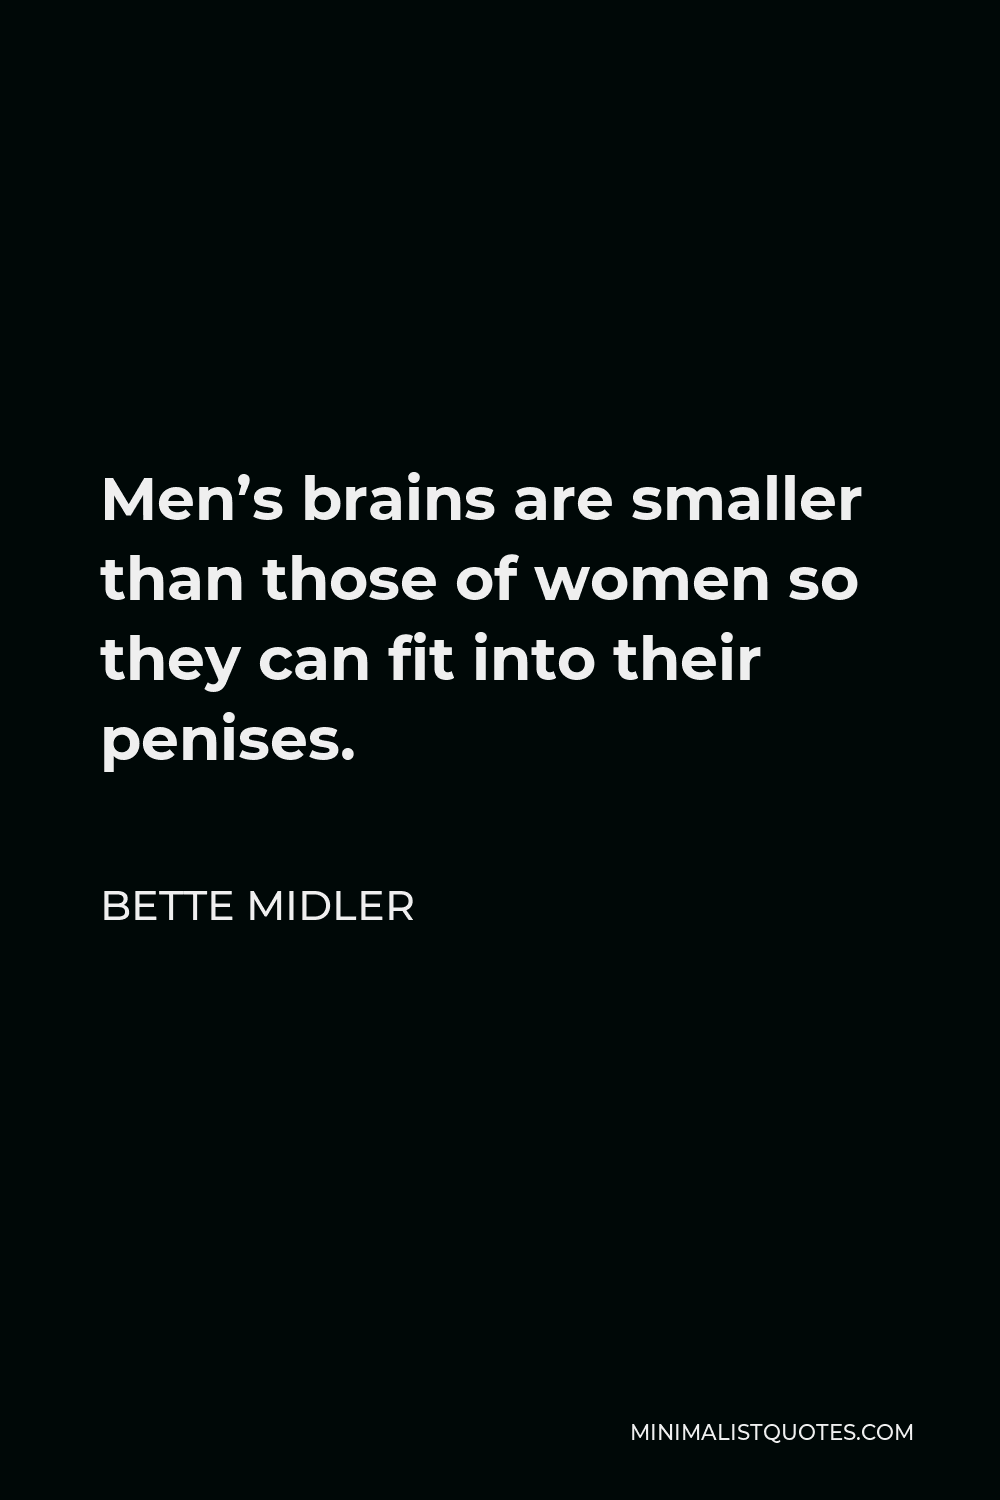 Bette Midler Quote - Men’s brains are smaller than those of women so they can fit into their penises.